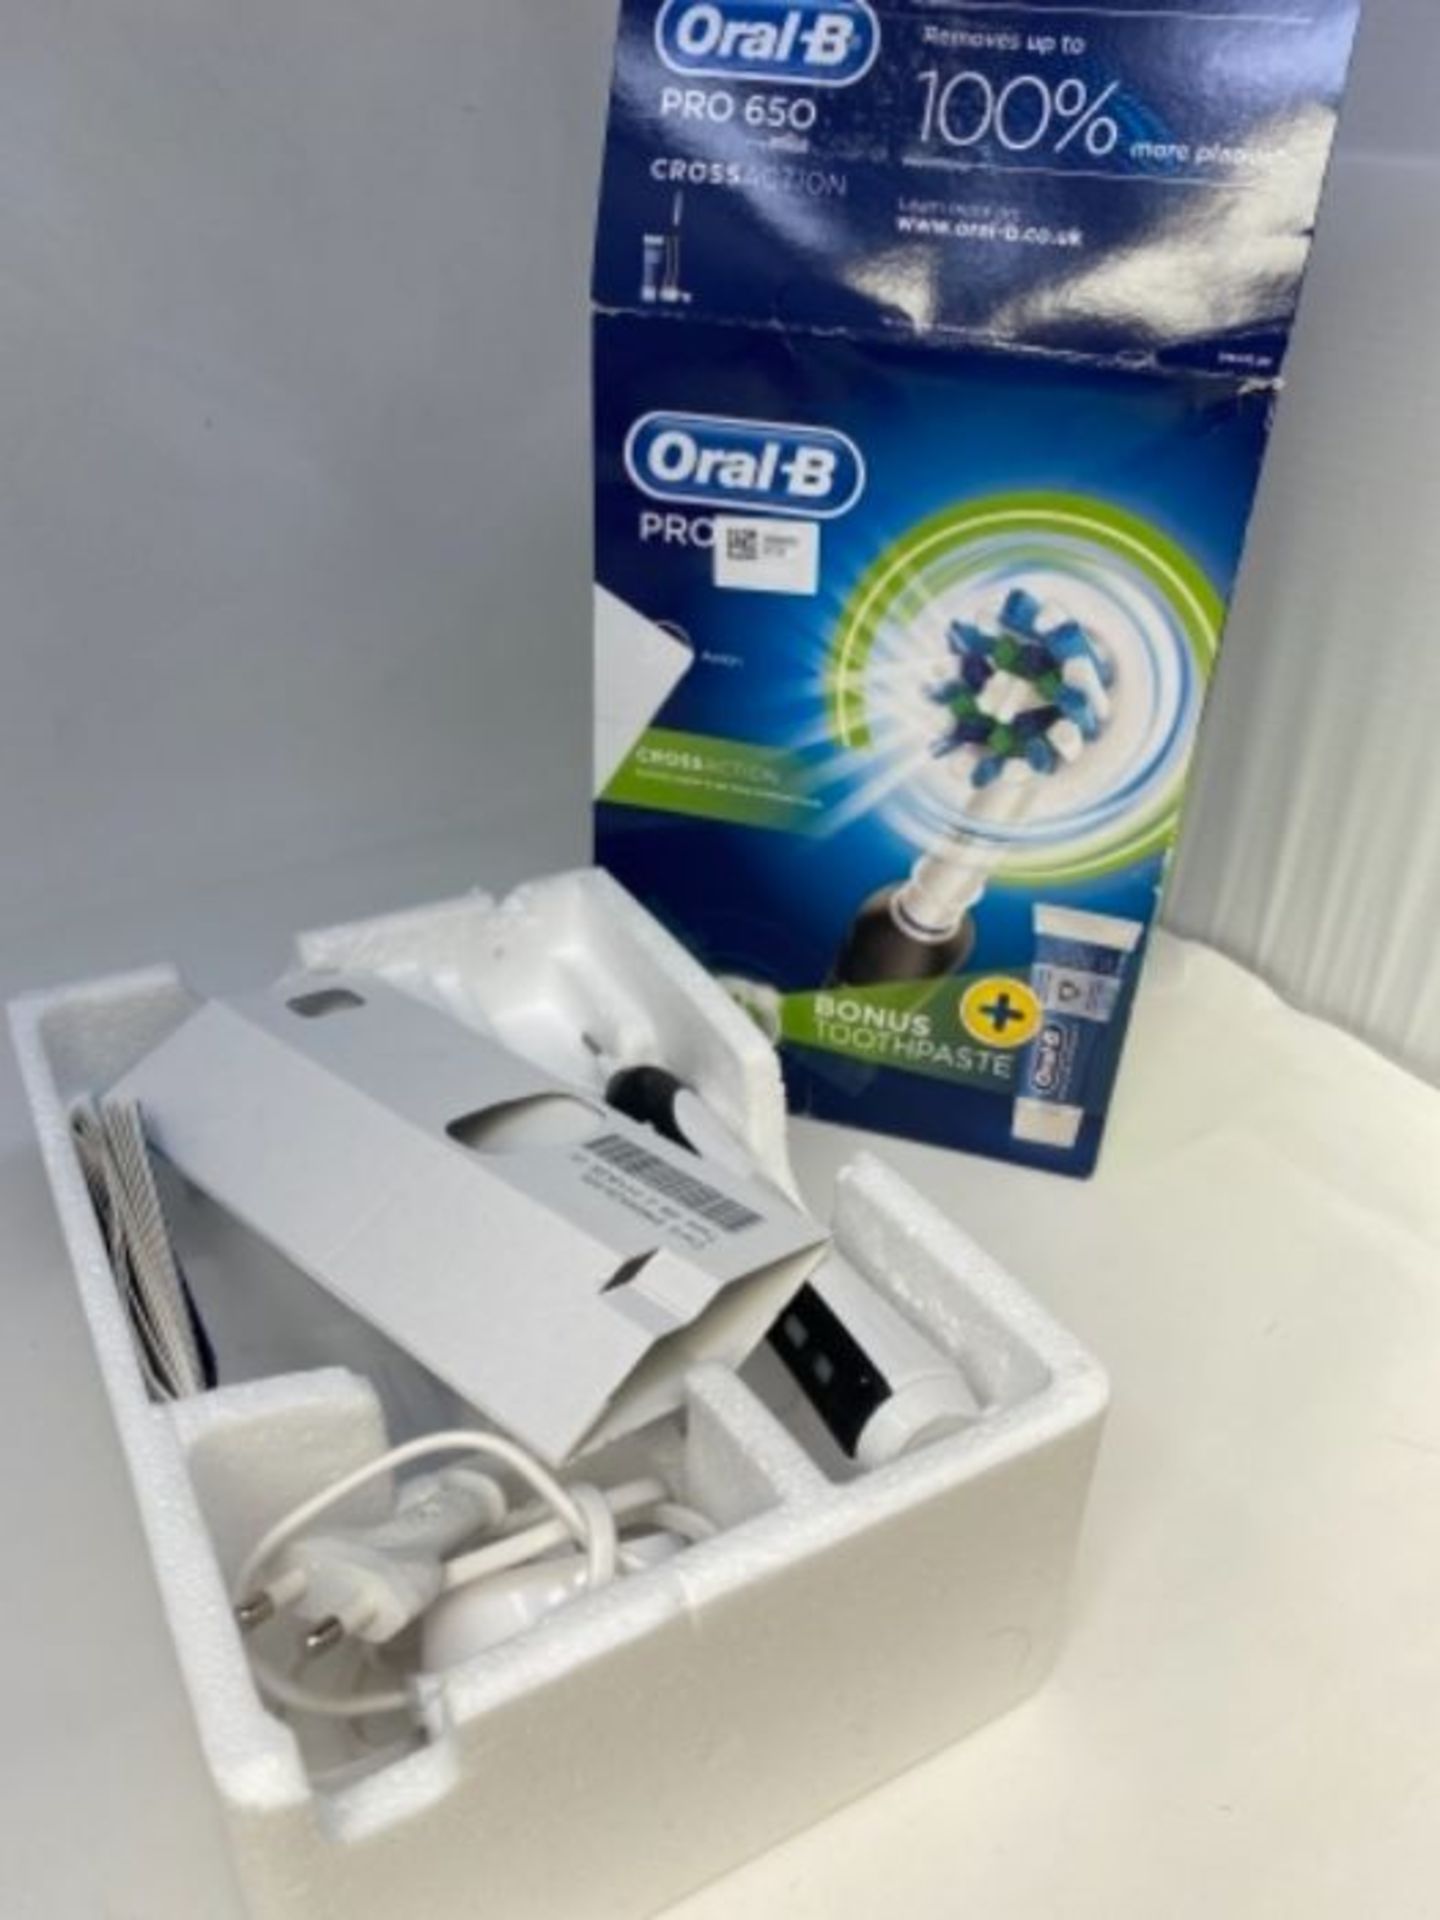 Oral-B Pro 650 Cross Action Electric Rechargeable Toothbrush Powered by Braun, 1 Black - Image 2 of 2